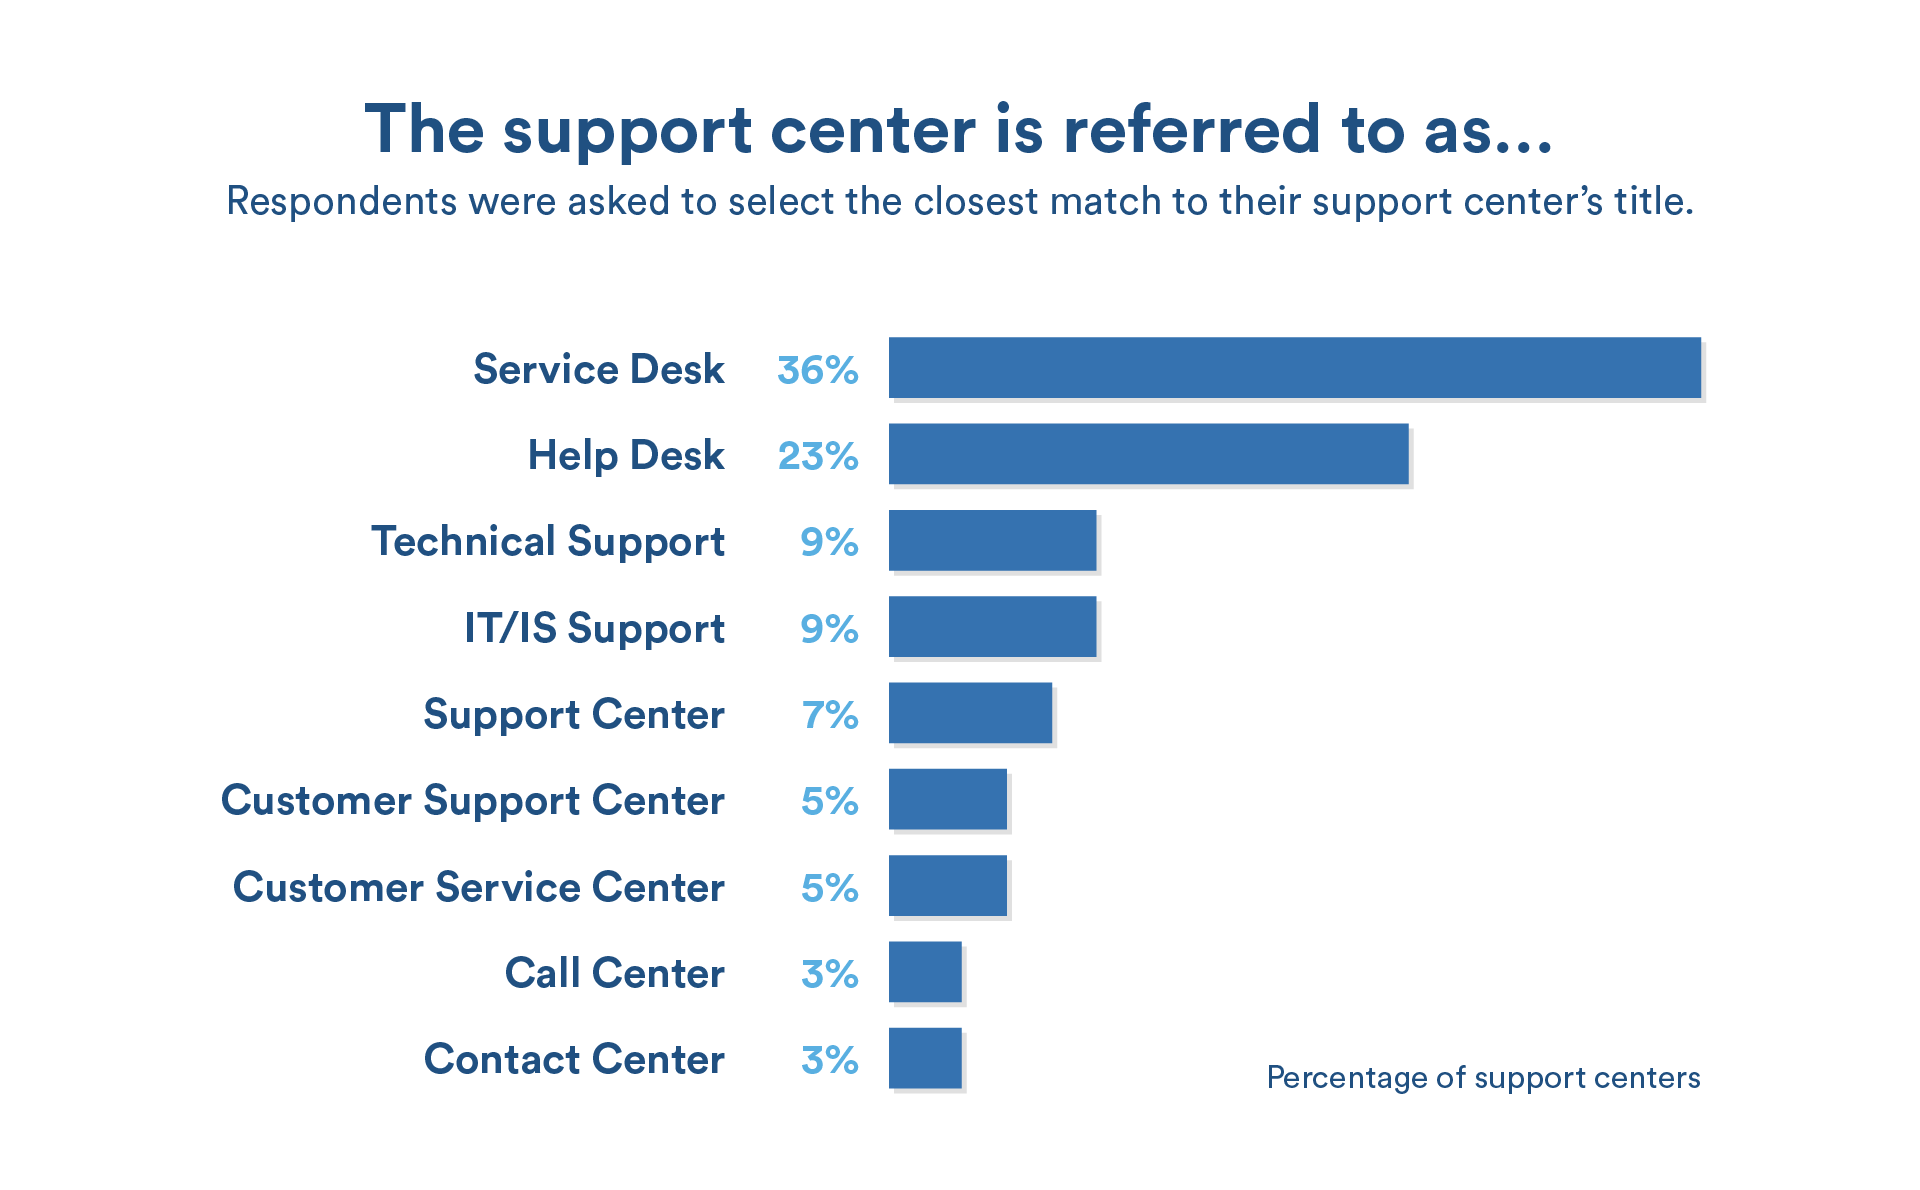 Percentage of support centers